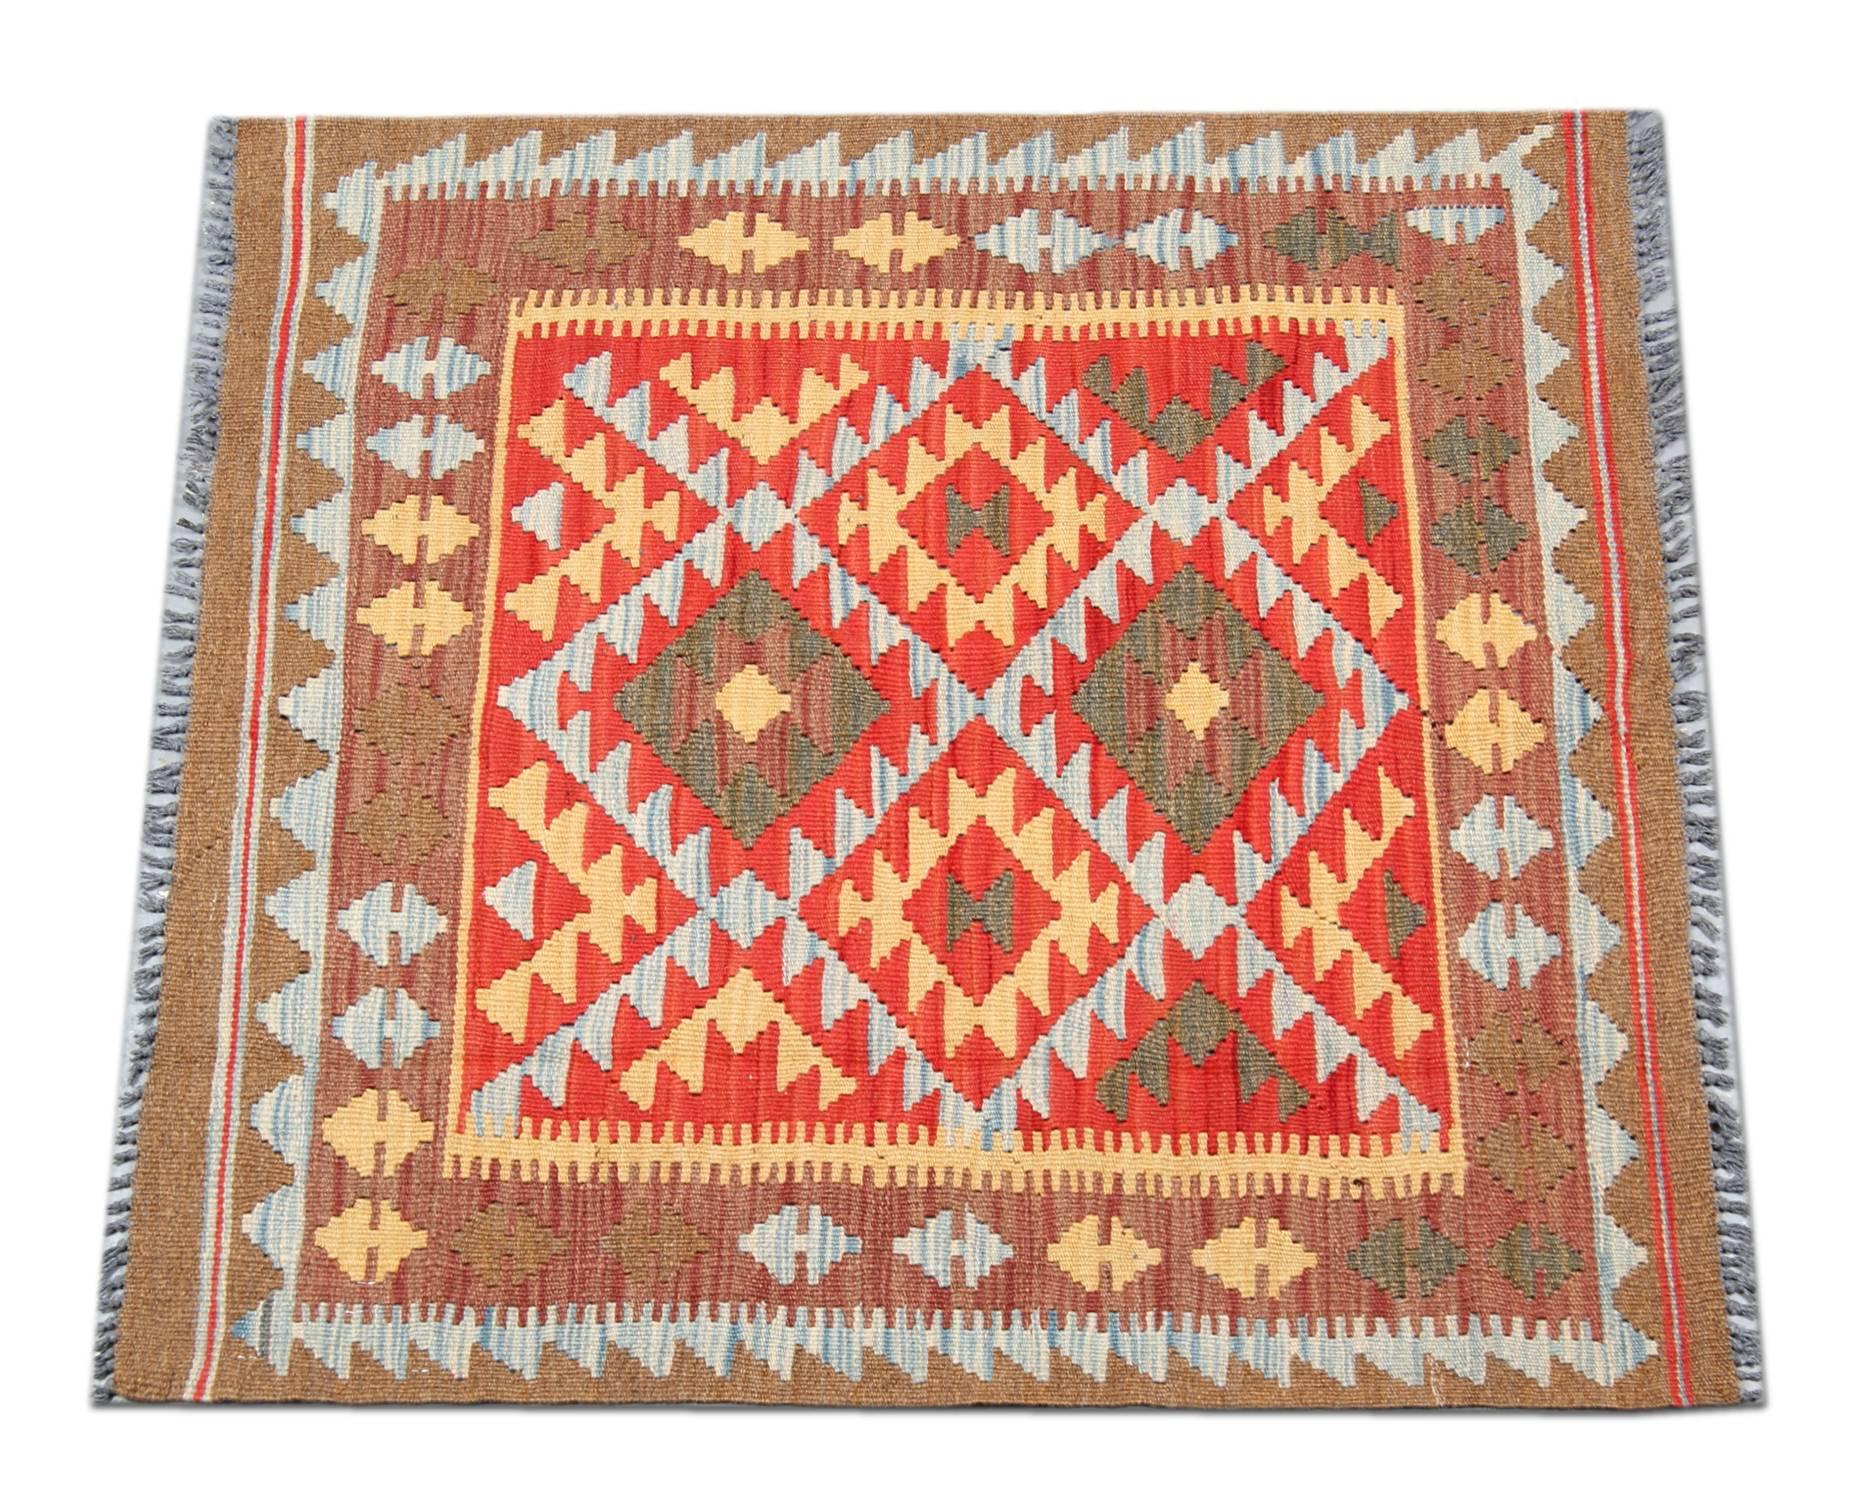 This small rug is a Kilim handmade in Afghanistan by Uzbek and Turkman tribes. This flat woven rugs has been made by using the best wool and cotton. Also the dyes are totally organic. The designs derive from the Persian Qashgai tribes. The colors